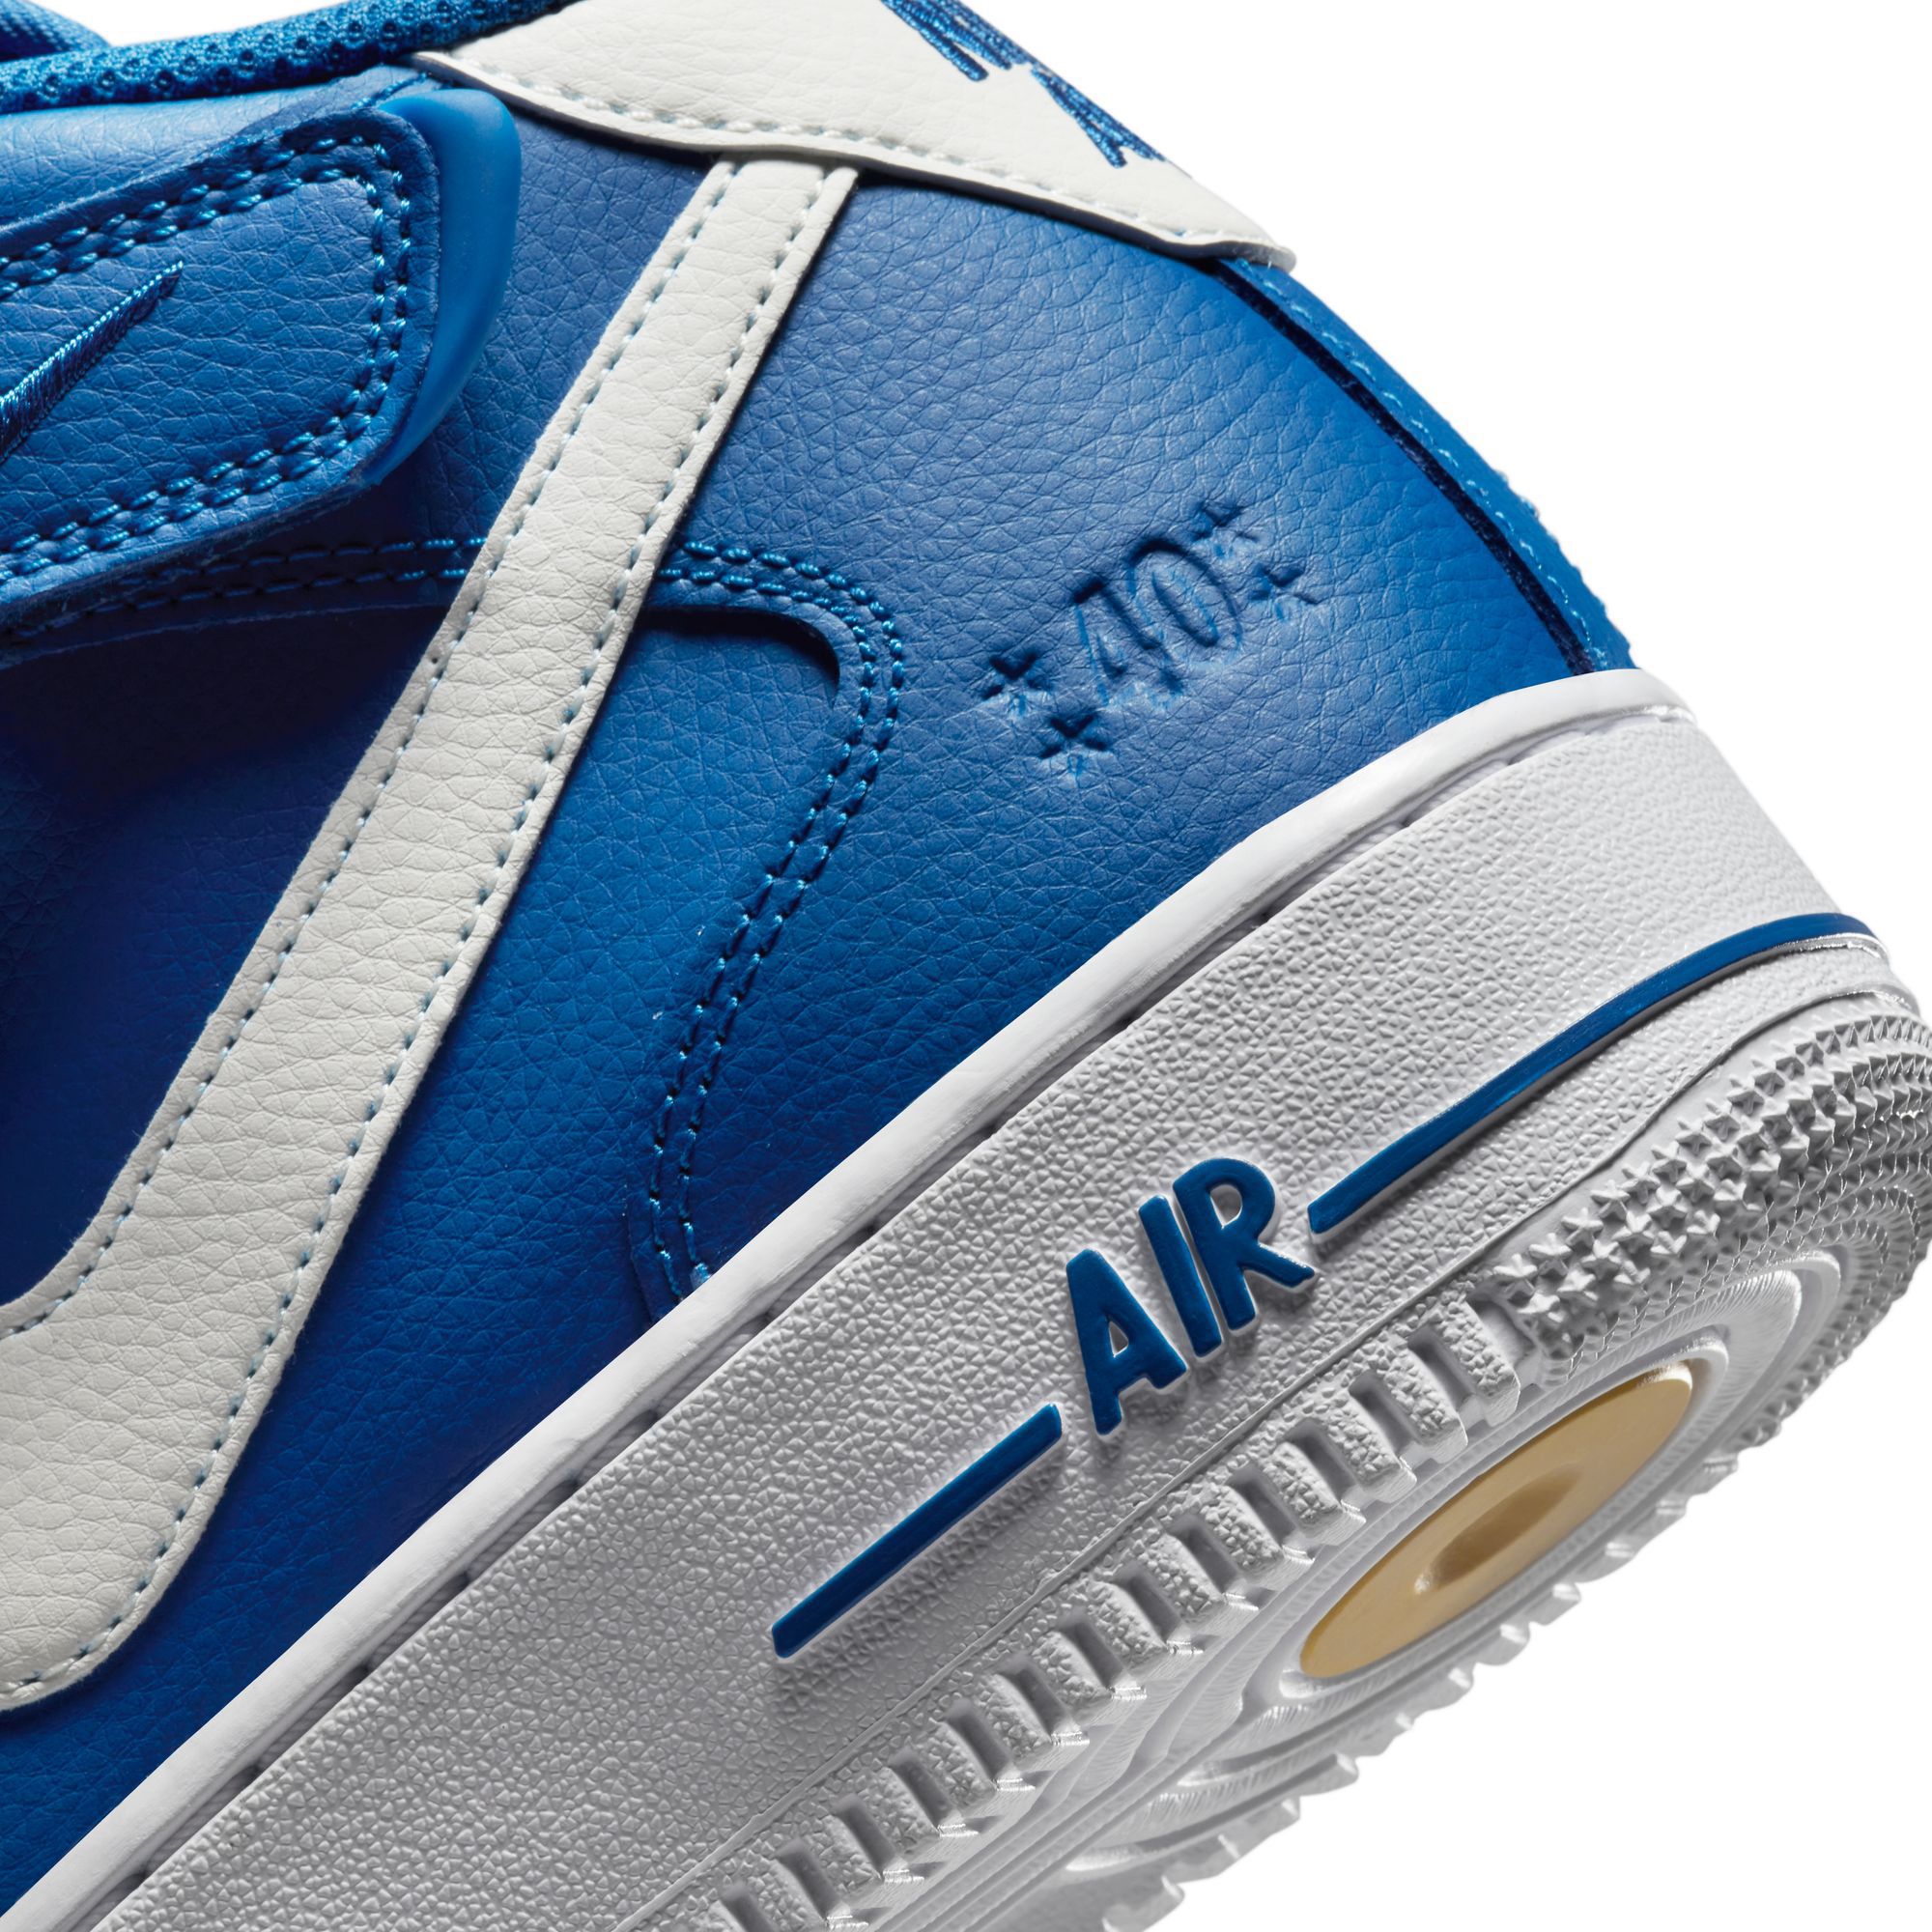 Where to buy Nike Air Force 1 Mid LV8 'Blue Jay'? Price and more